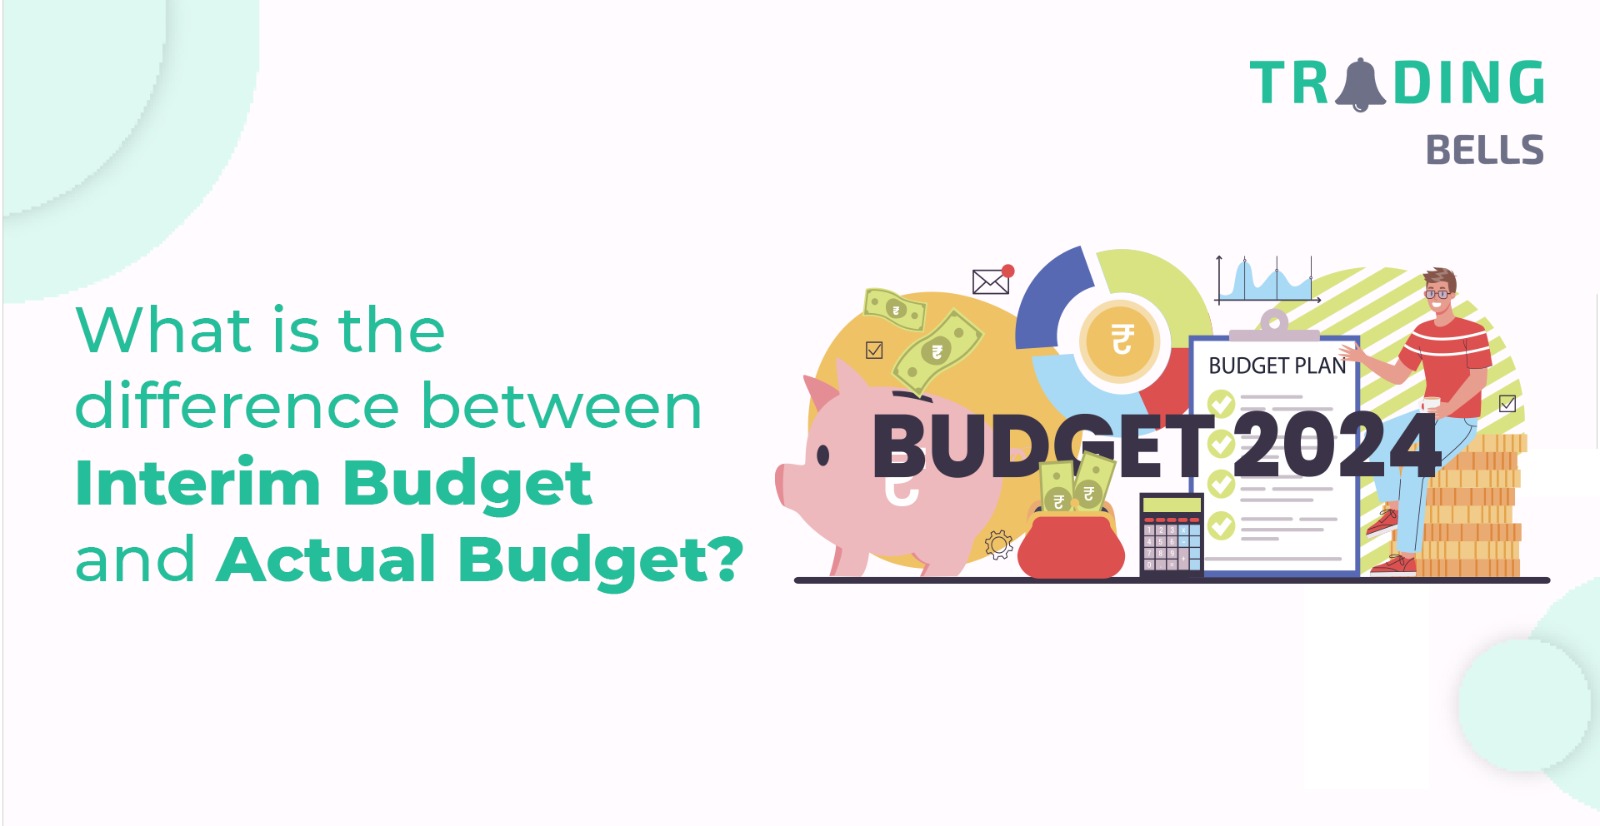 What is the difference between an Interim Budget and an Actual Budget